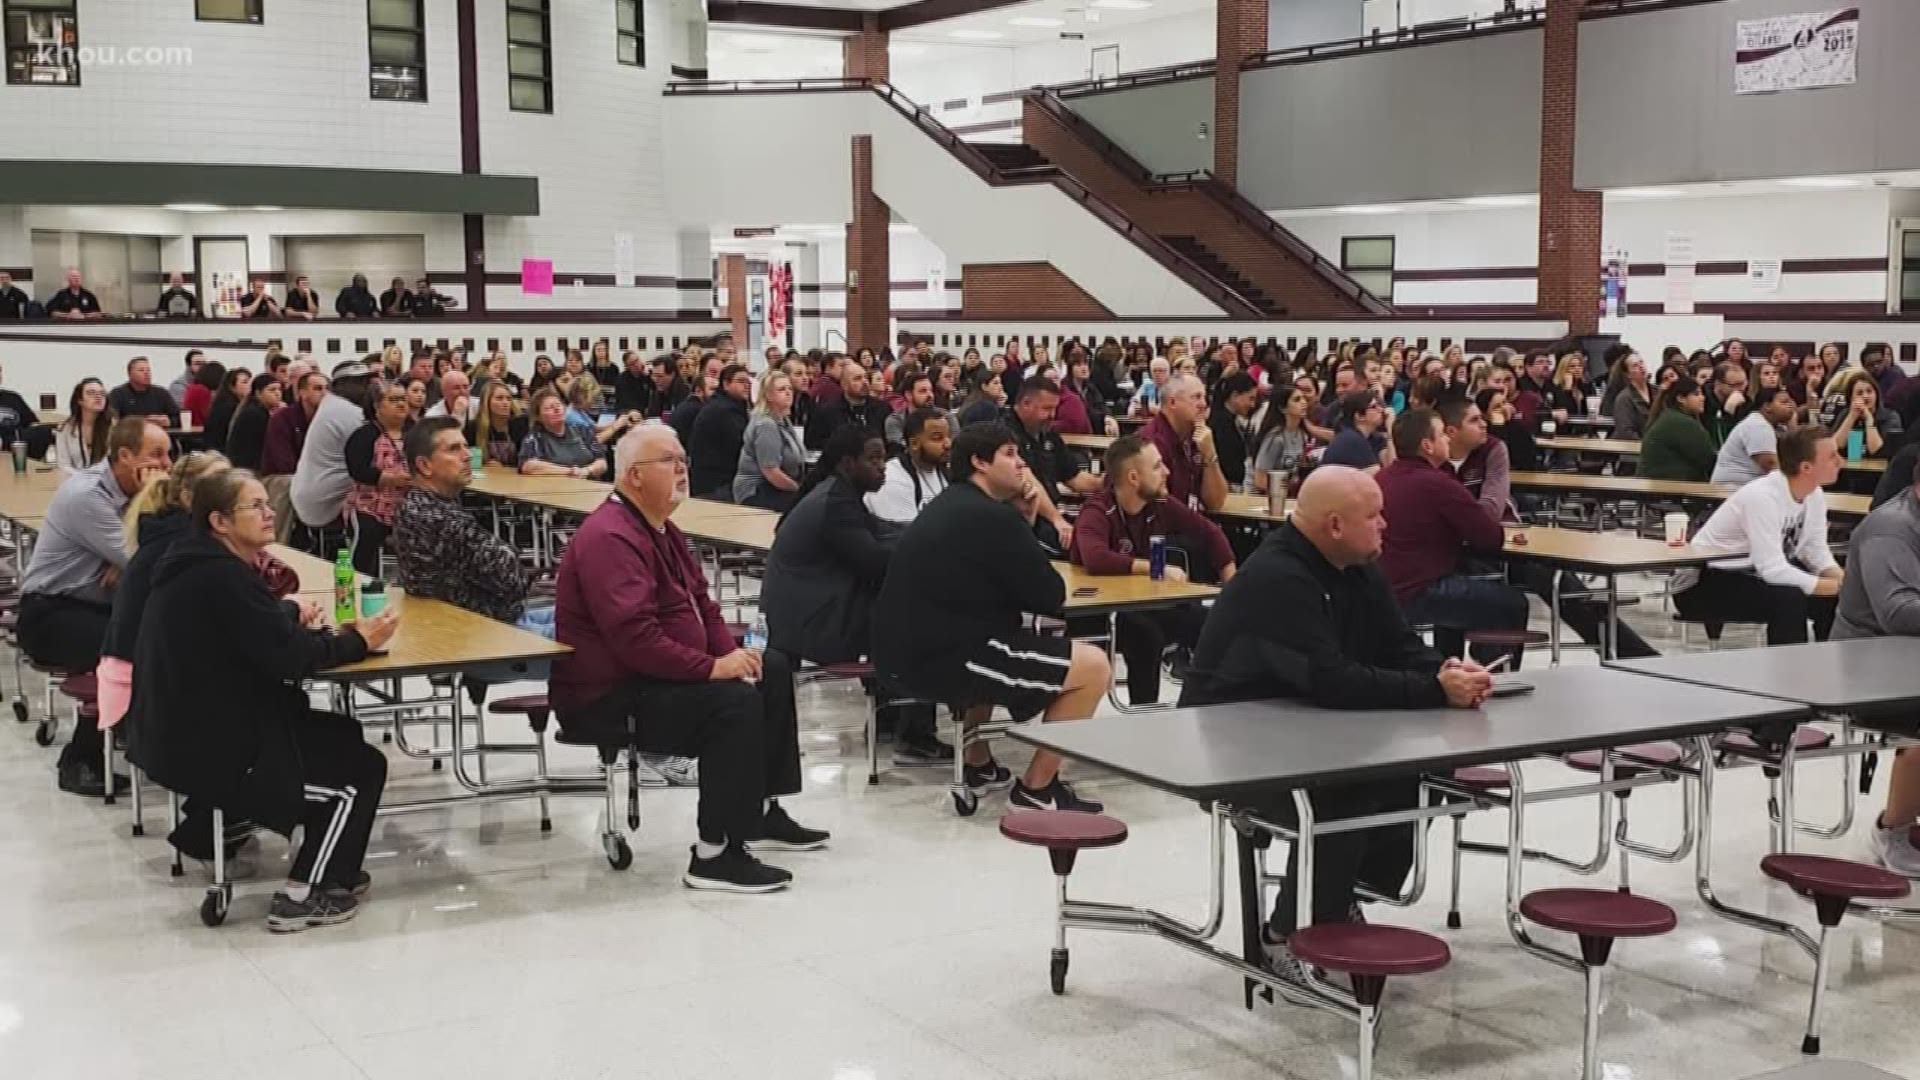 Teachers in Pearland are learning how to respond to an active shooter just before they go back to school.